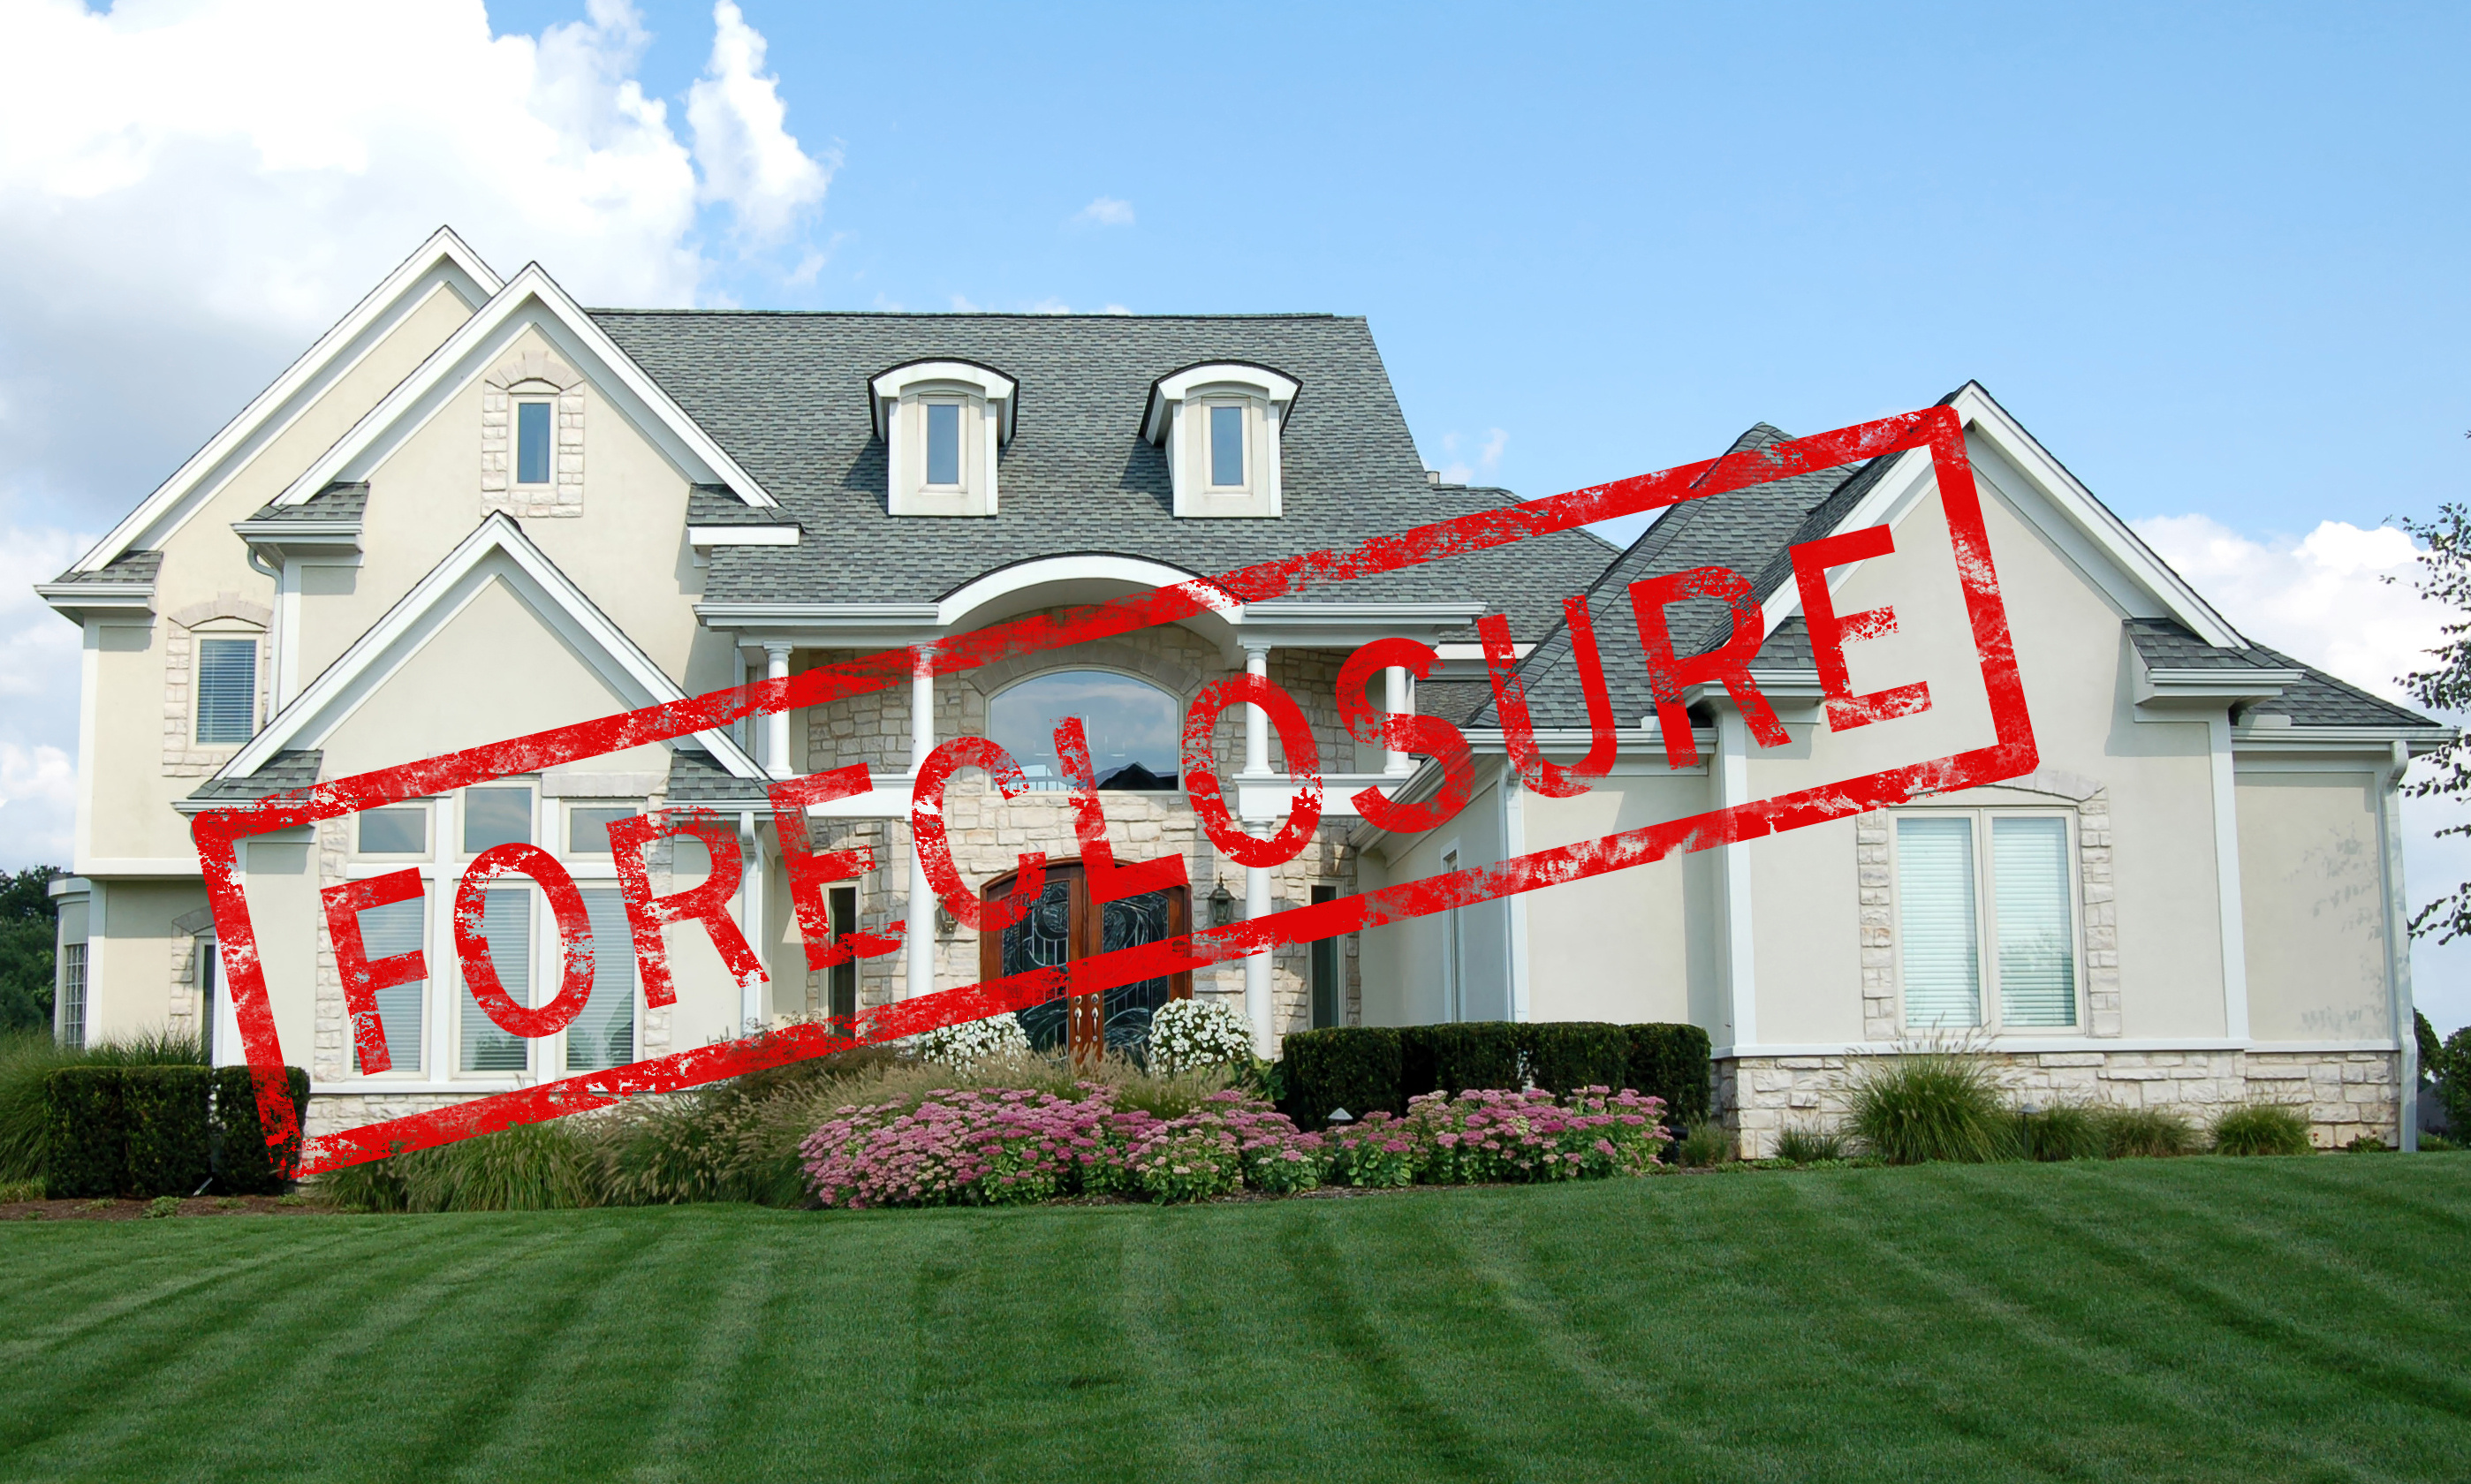 Call CALI Real Estate Appraisals to discuss valuations of Riverside foreclosures